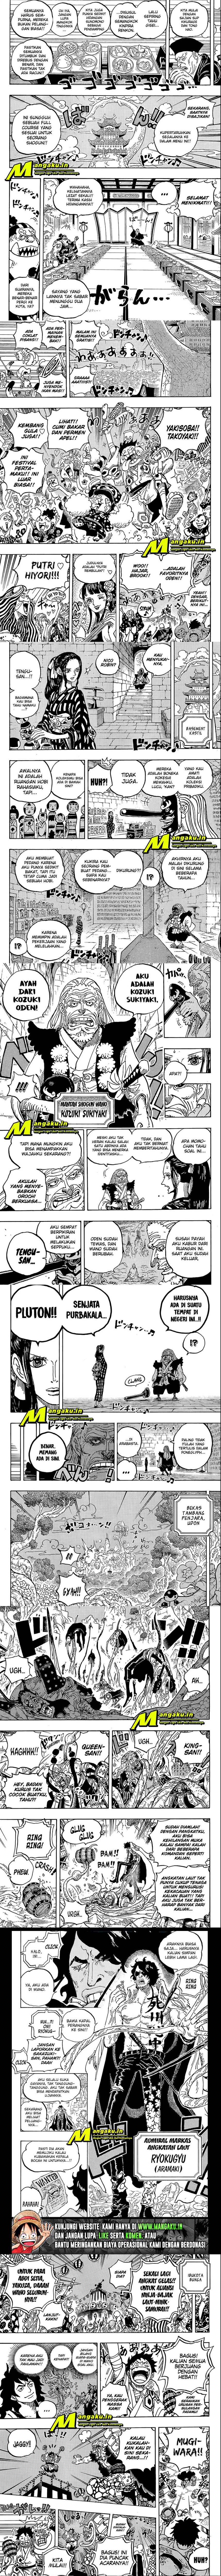 One Piece Chapter 1053B